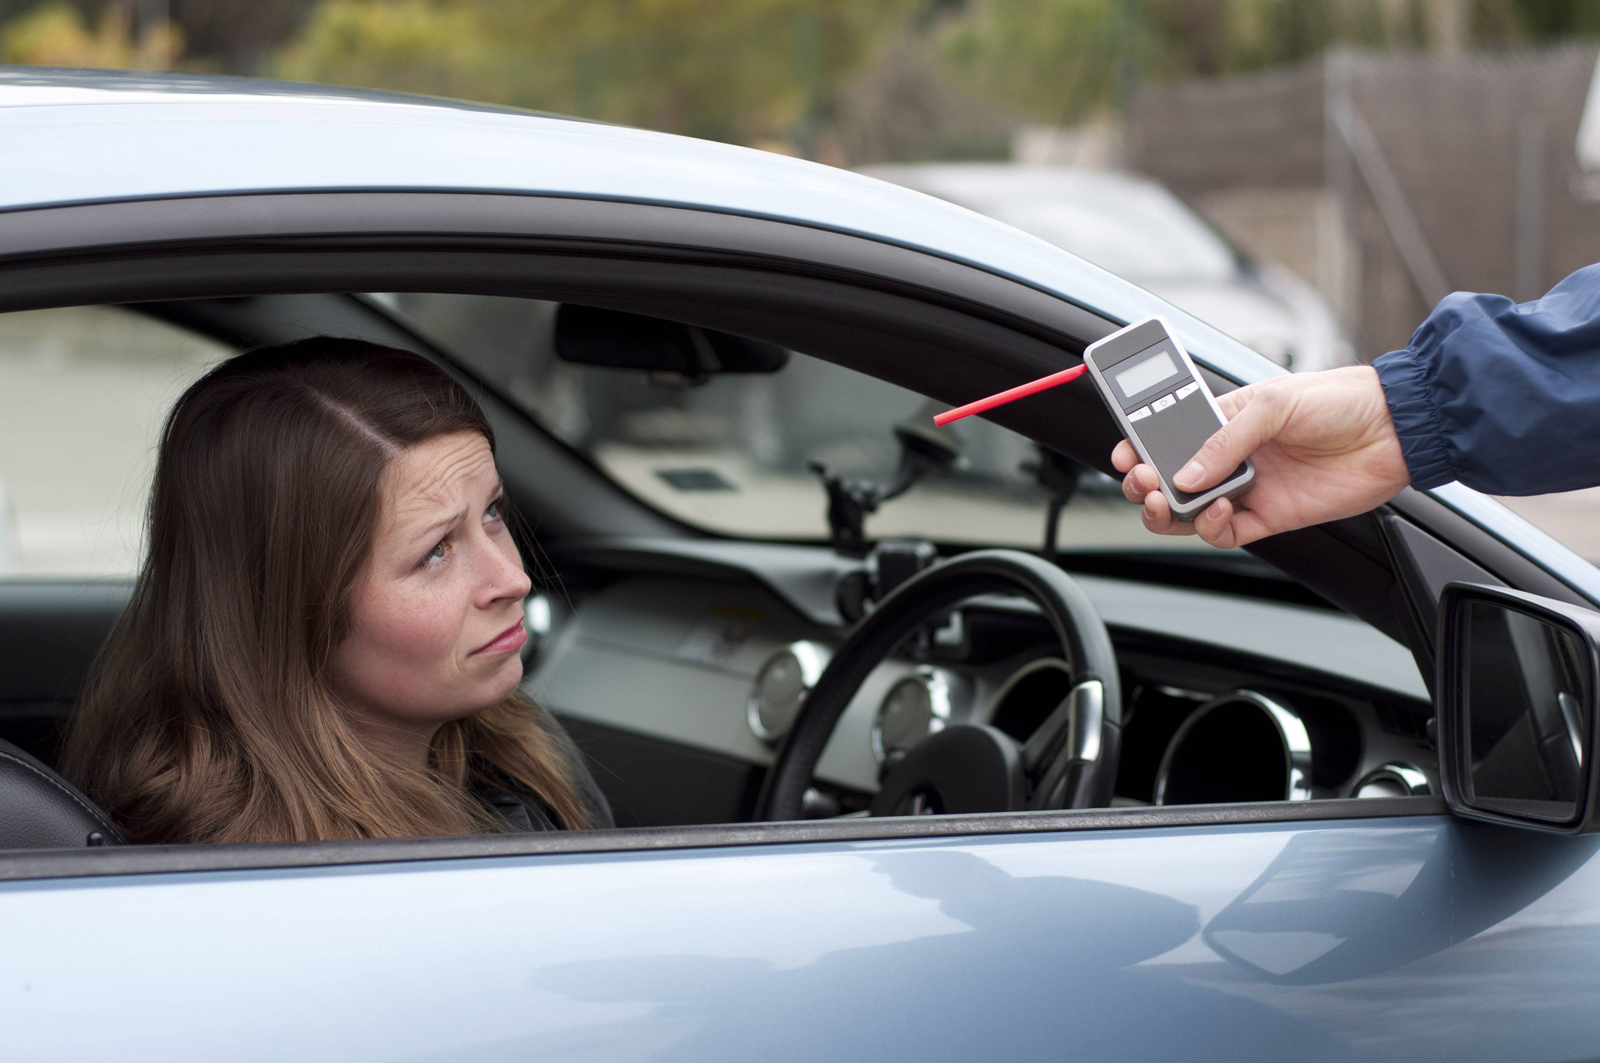 A woman looking unhappy after failing a breathalyser test in her car